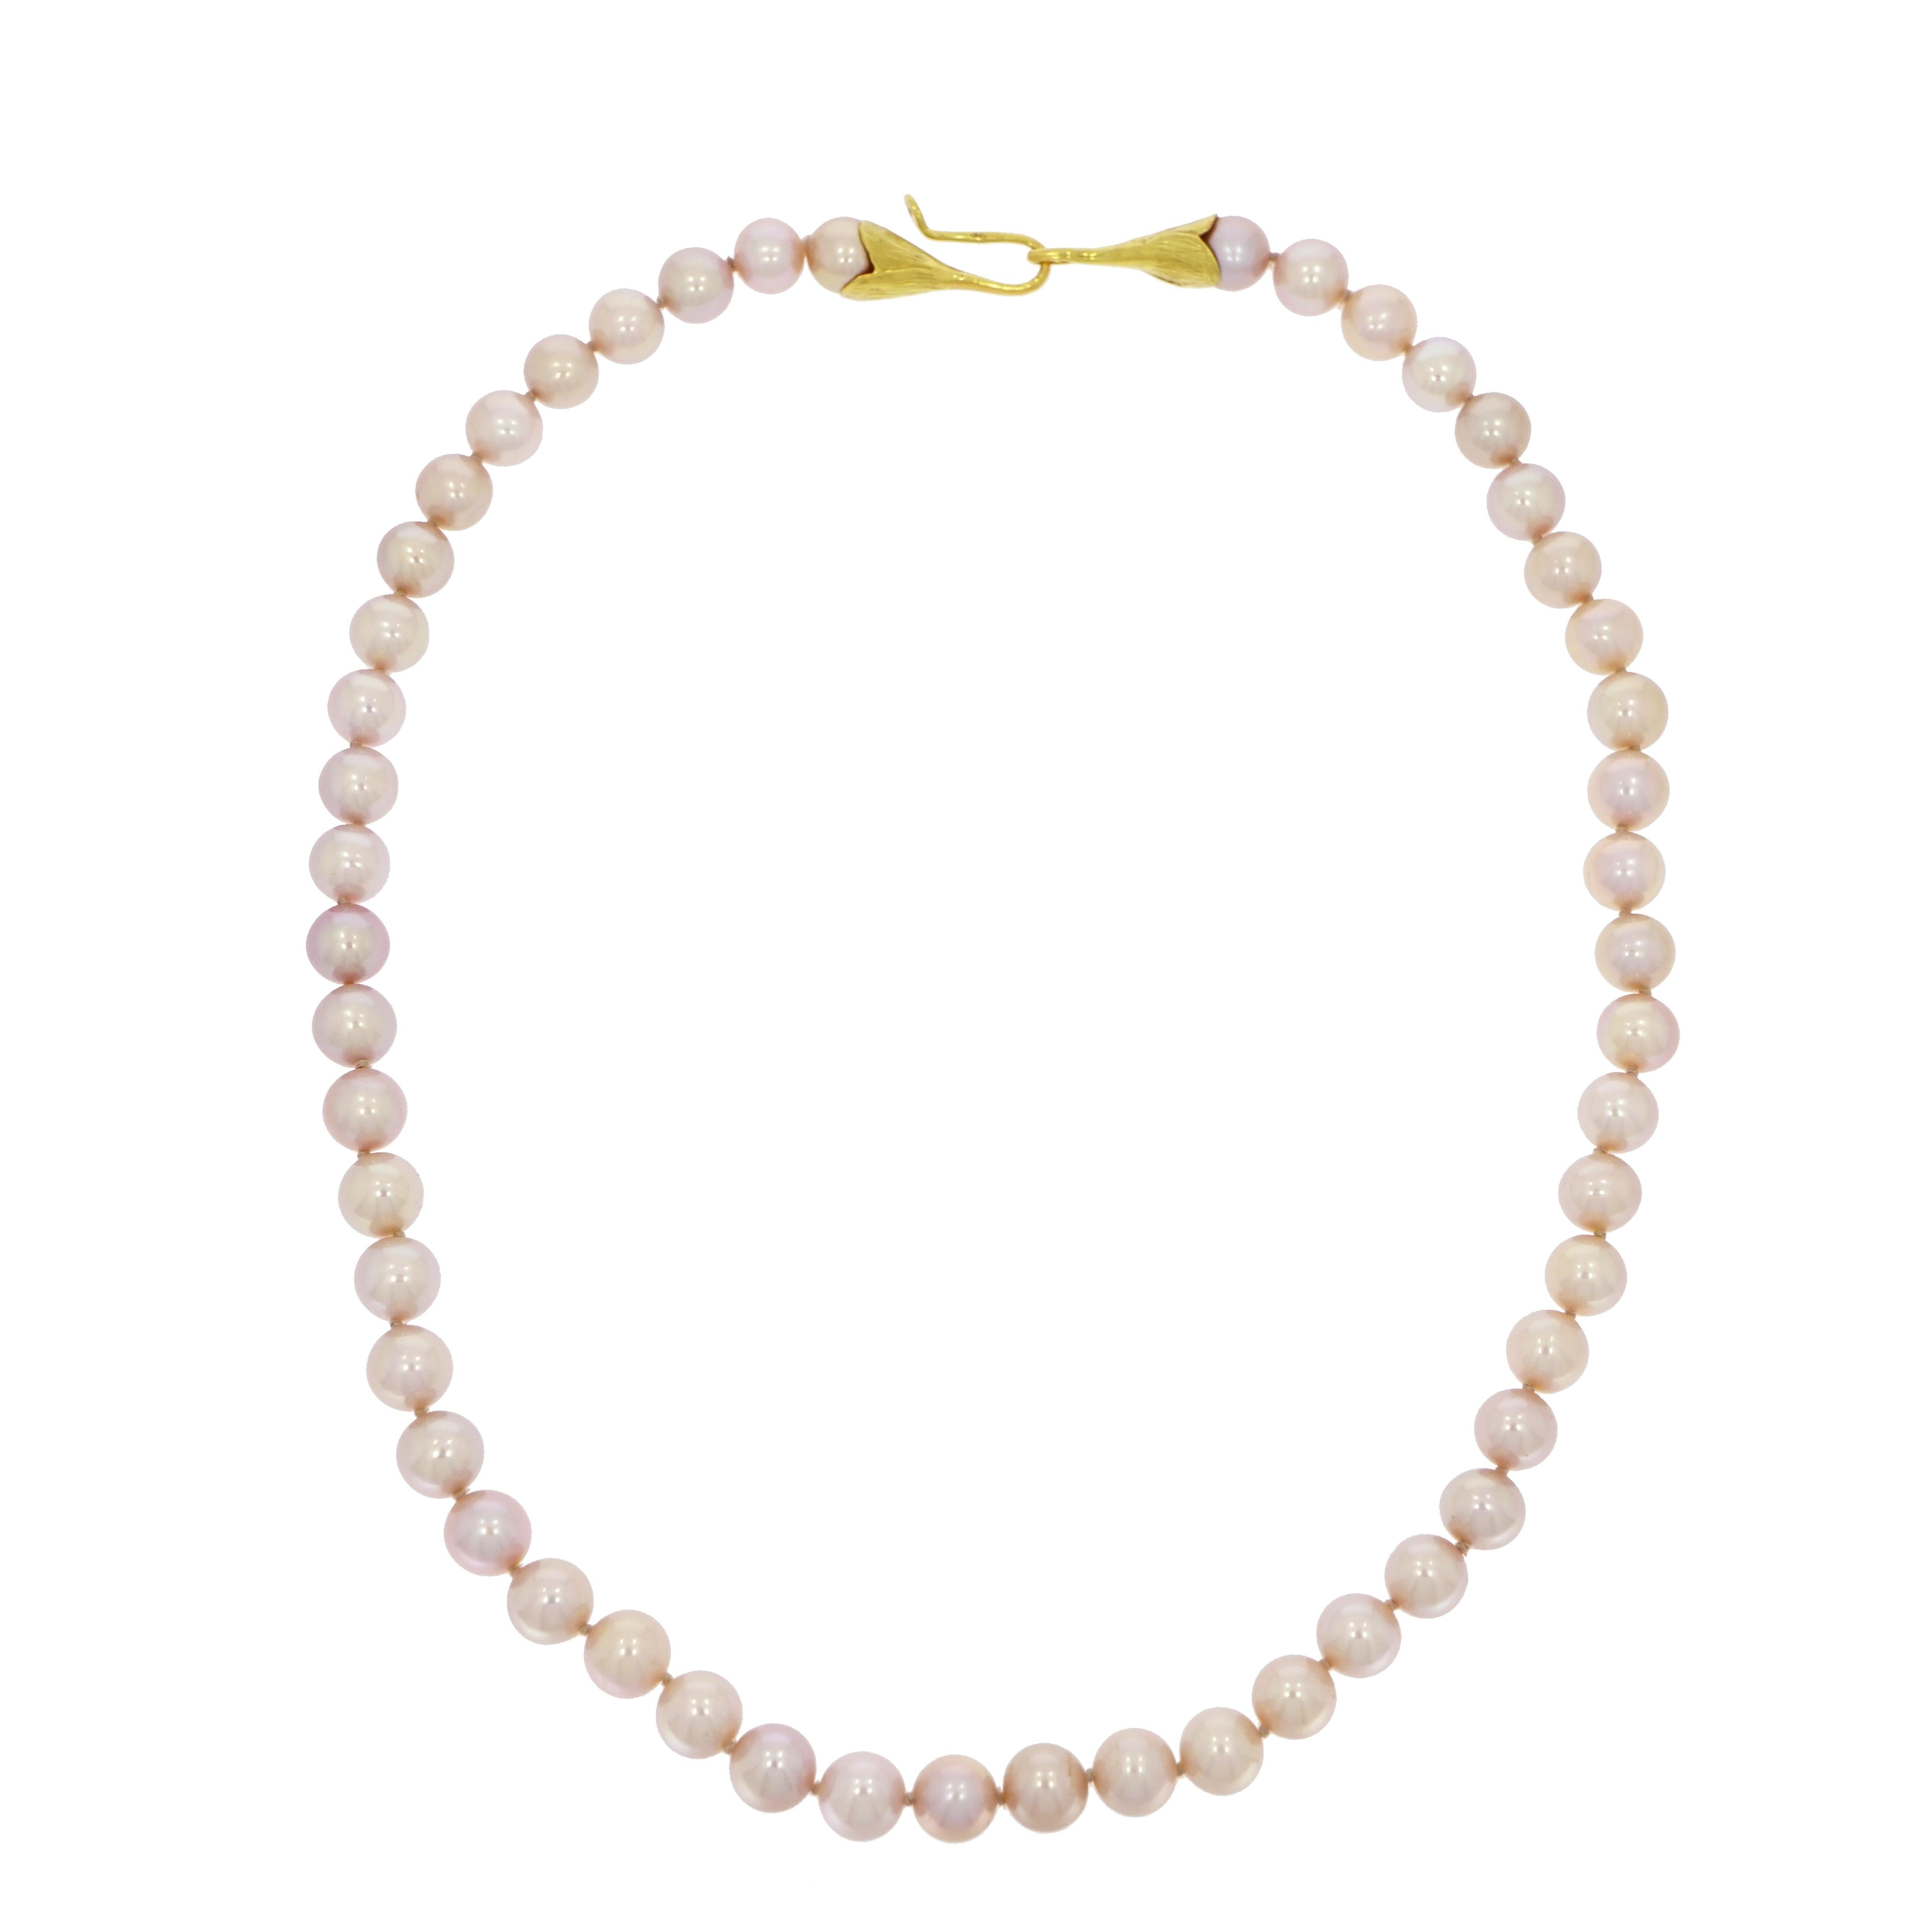 Purplish Pearl Necklace with Yellow Gold Clasp For Sale